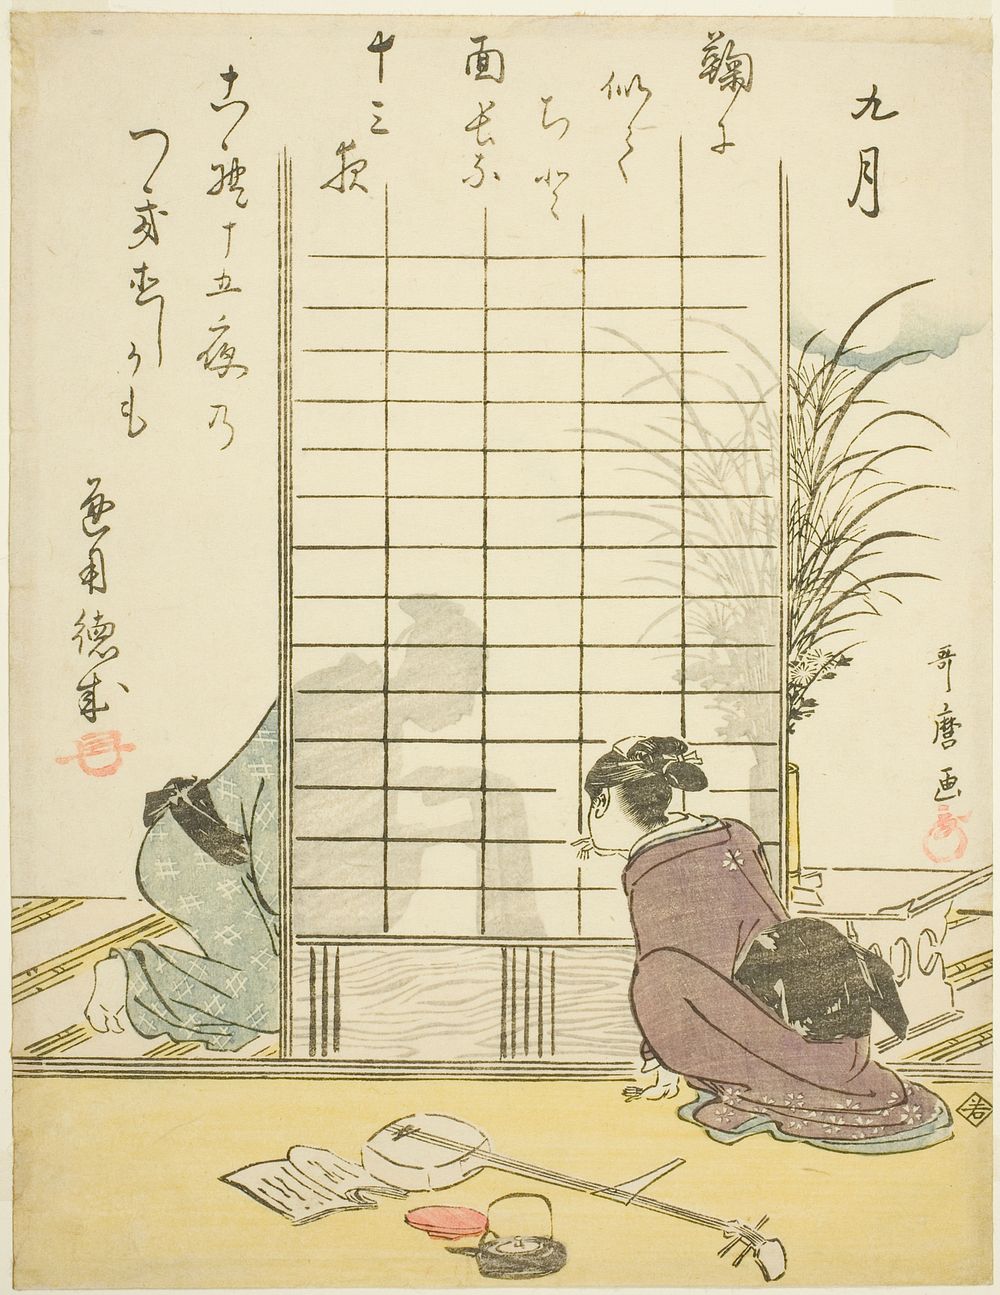 The Ninth Month (Kugatsu), from an untitled series of genre scenes in the twelve months, with kyoka poems by Kitagawa Utamaro